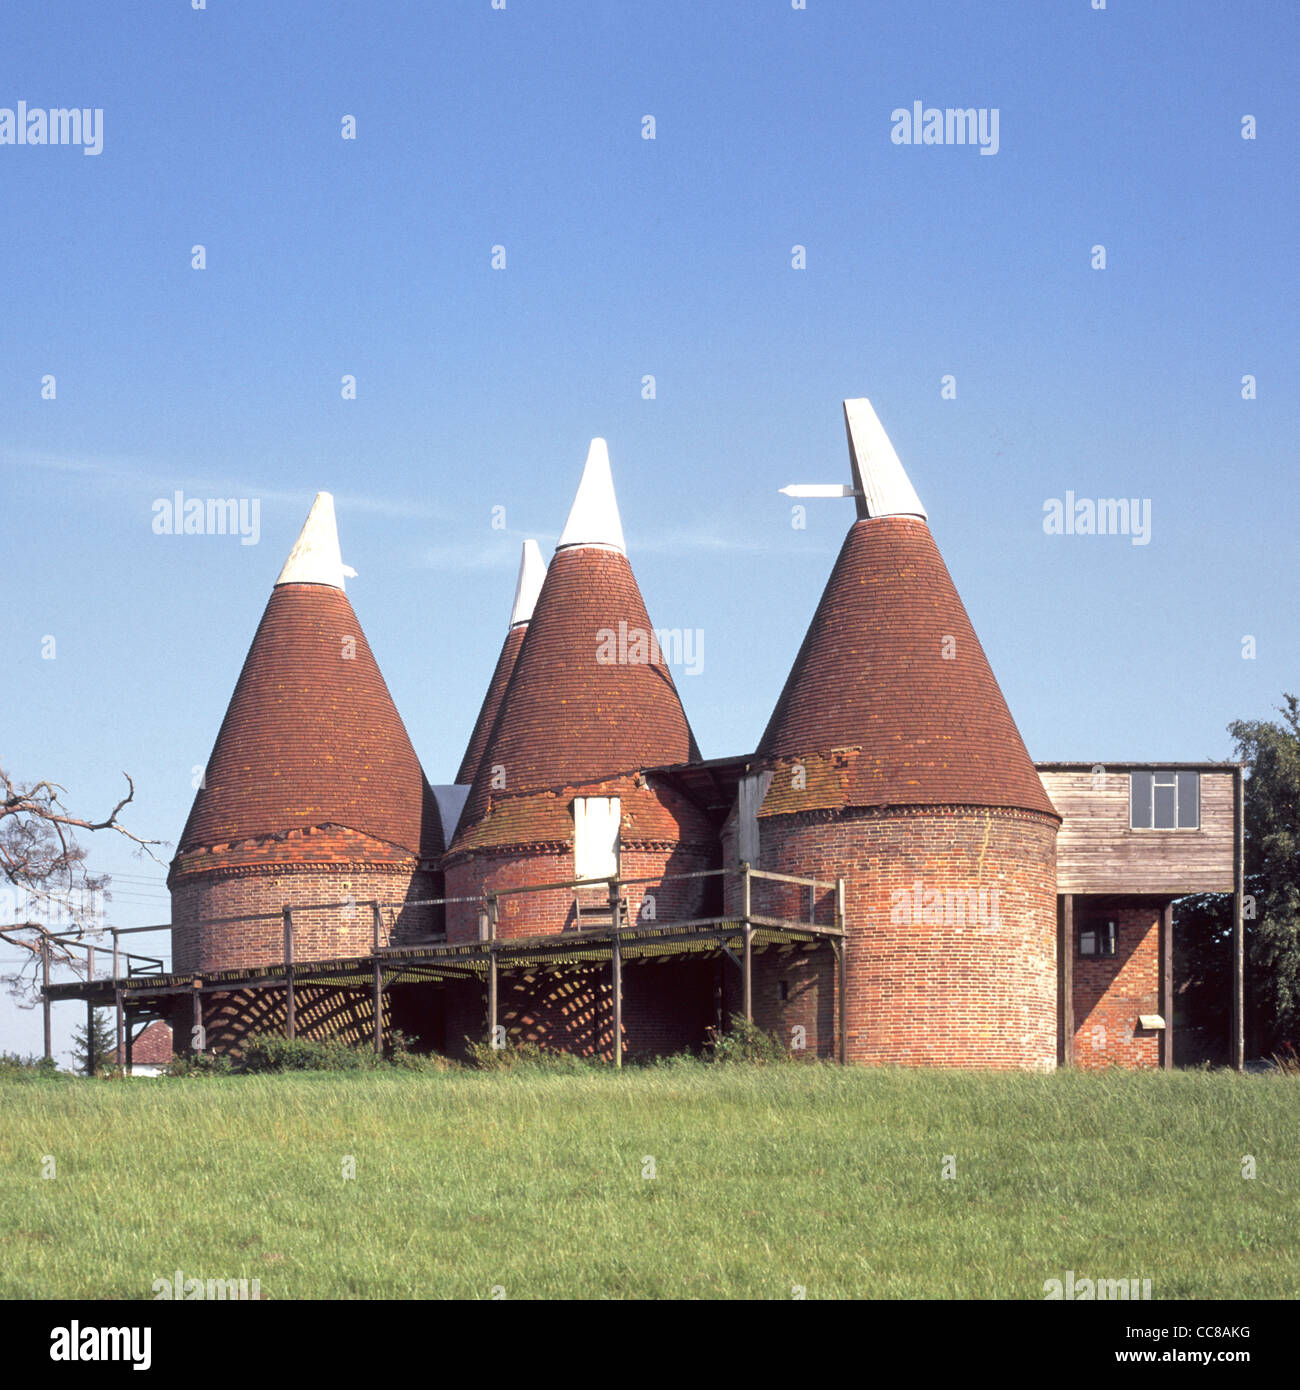 Bygone history view of Oast house used for kiln drying of hops in beer brewing process near Horsmonden village set in Kent English countryside UK Stock Photo